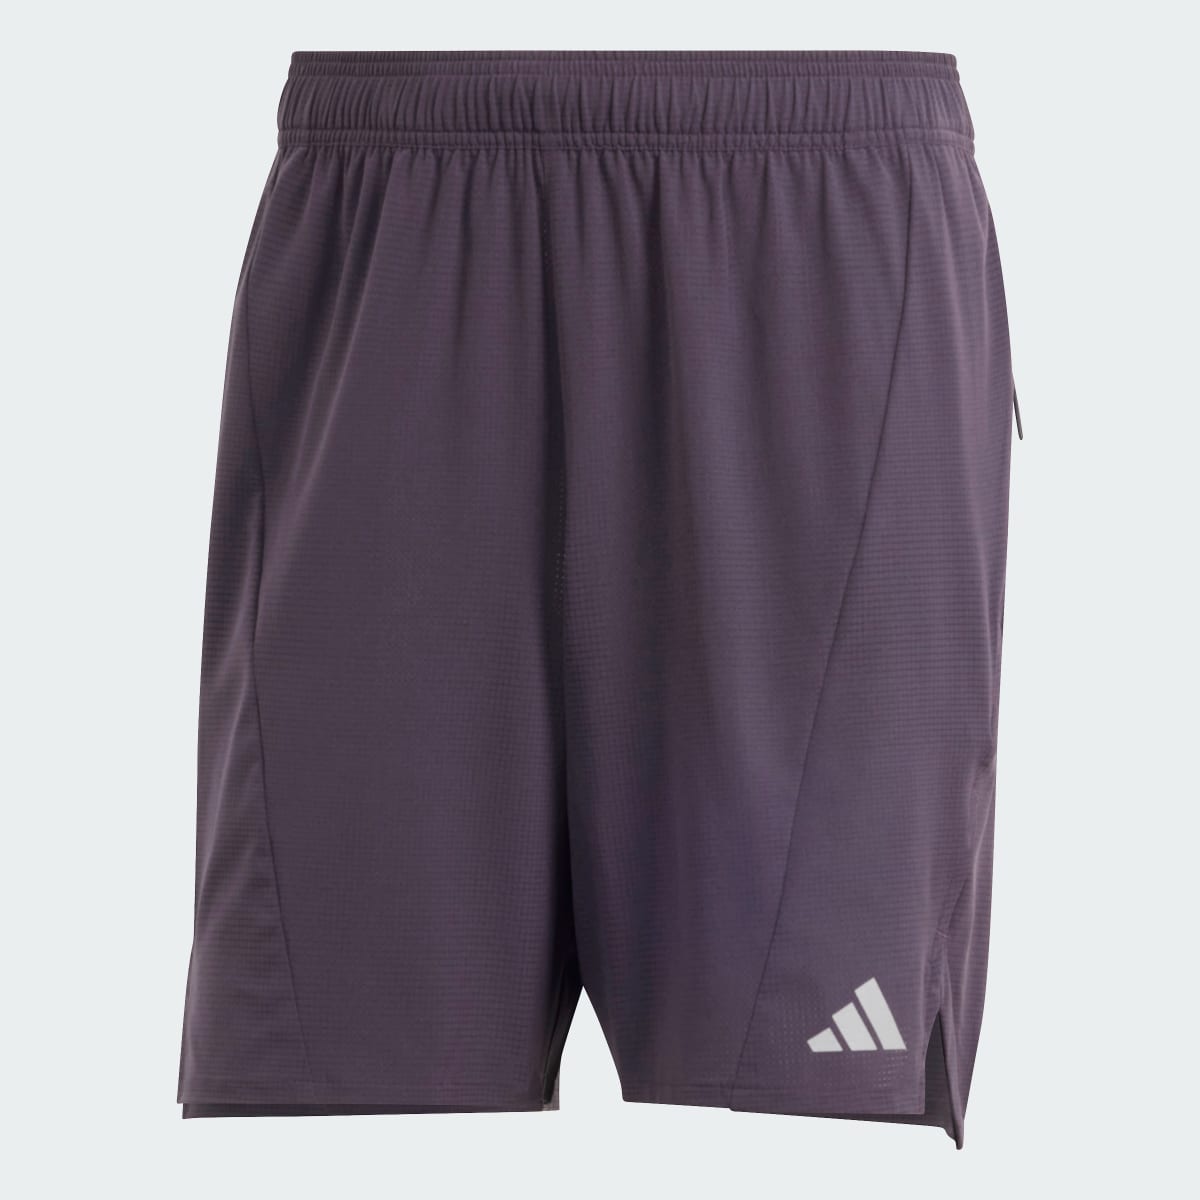 Adidas Designed for Training HIIT Workout HEAT.RDY Shorts. 4